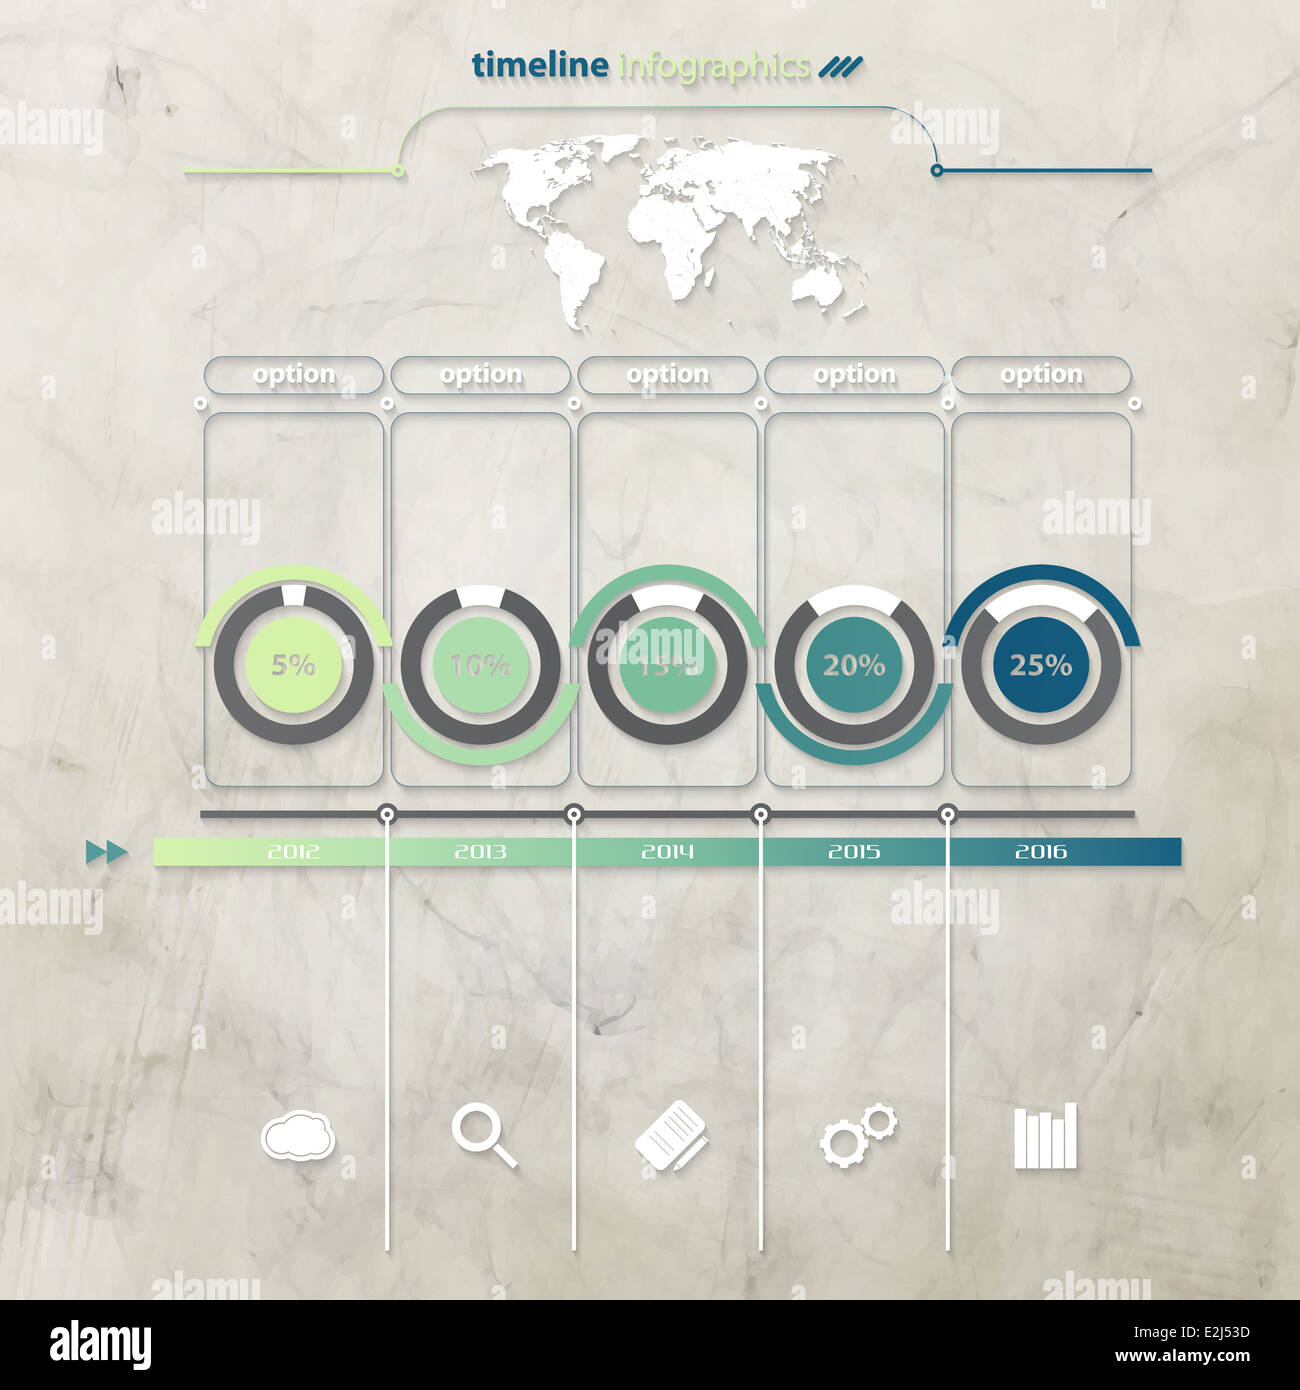 timeline info graphics with icons and world map over grunge background Stock Photo